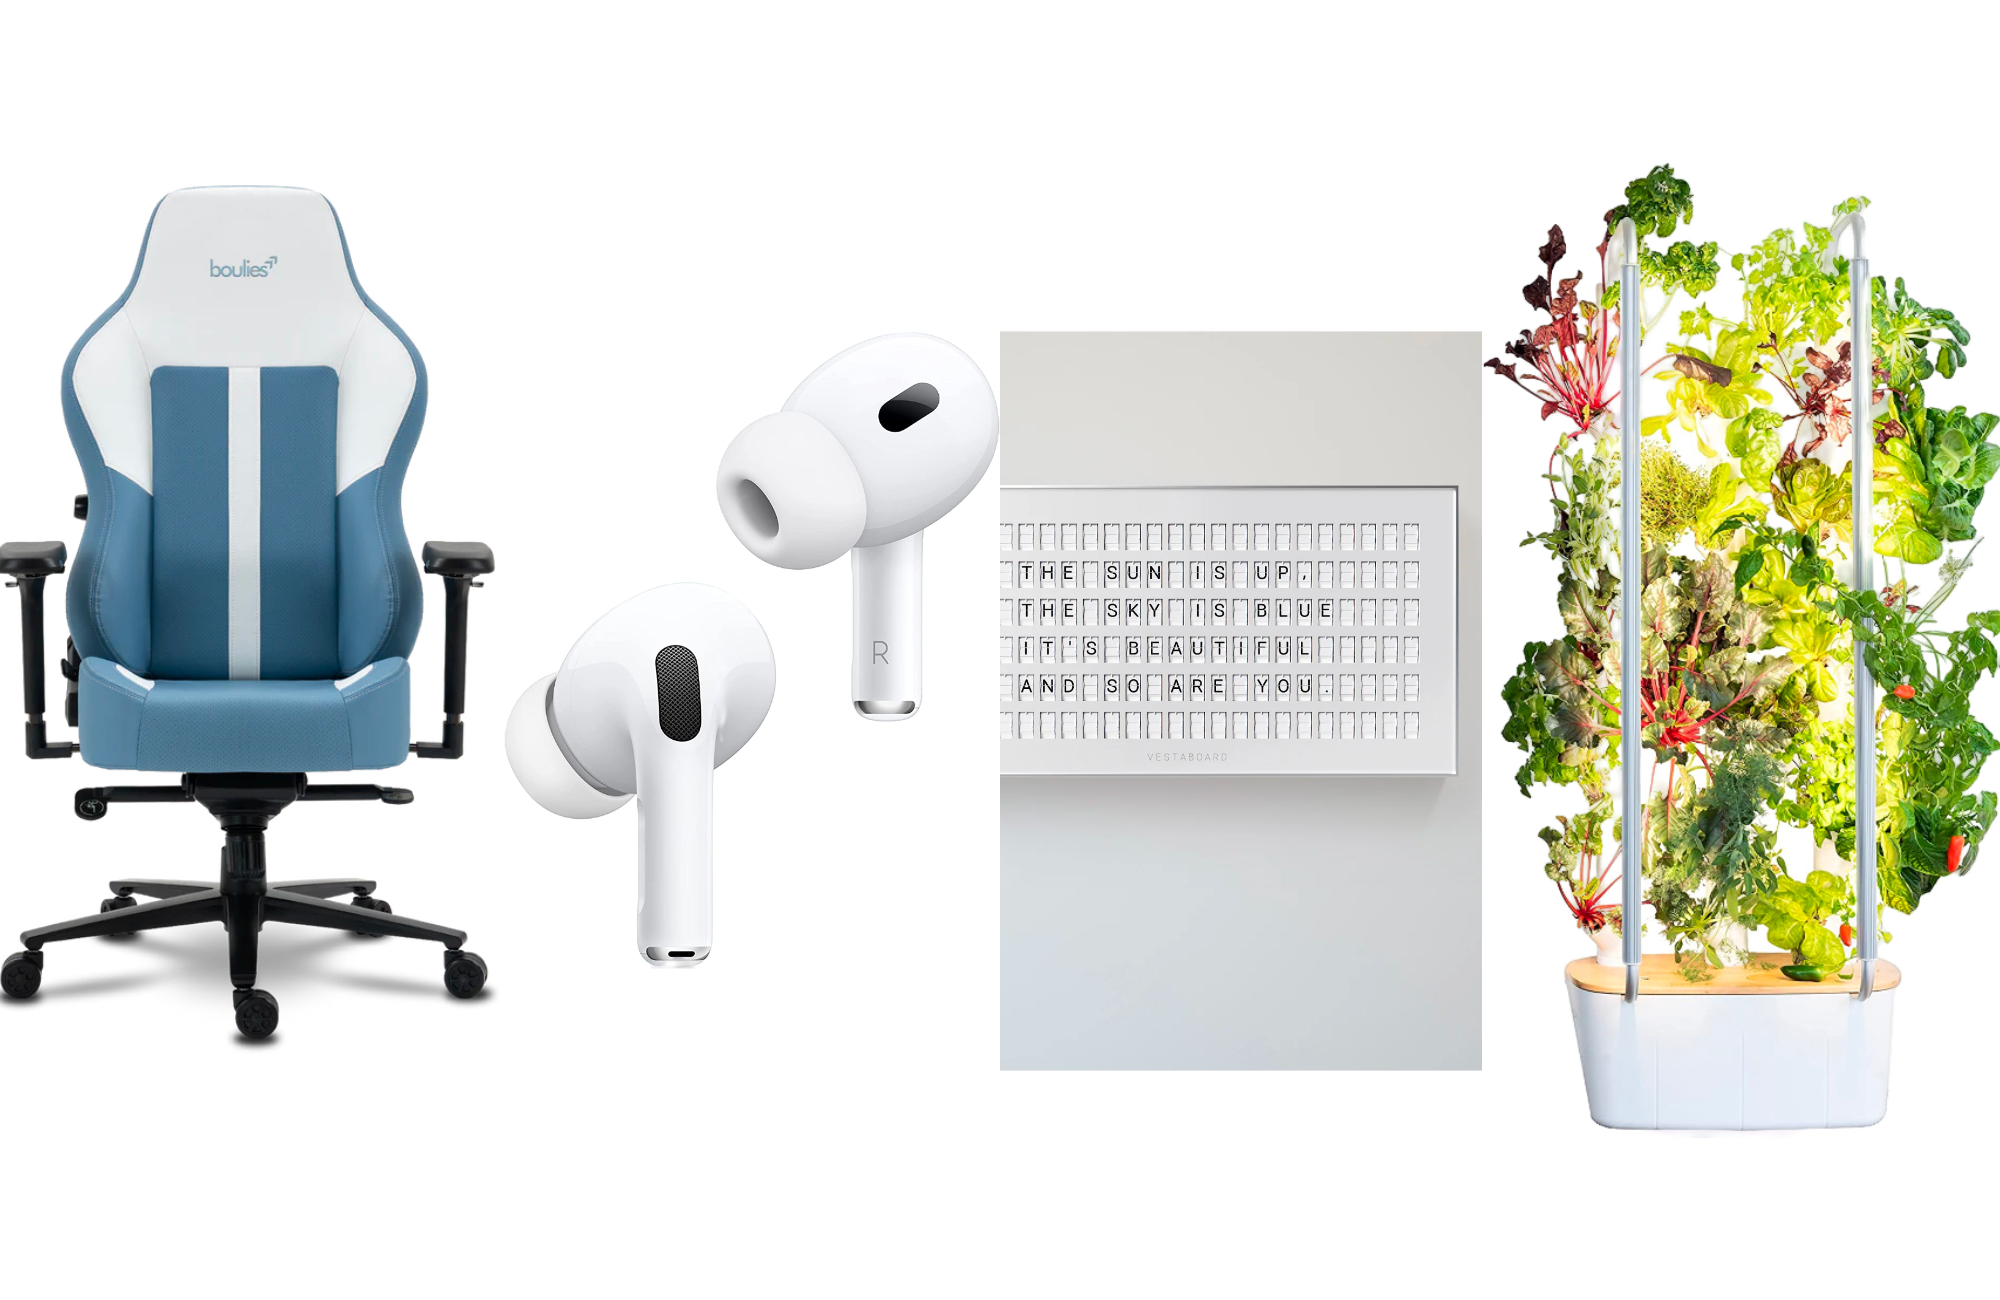 The best productivity presents for home and office